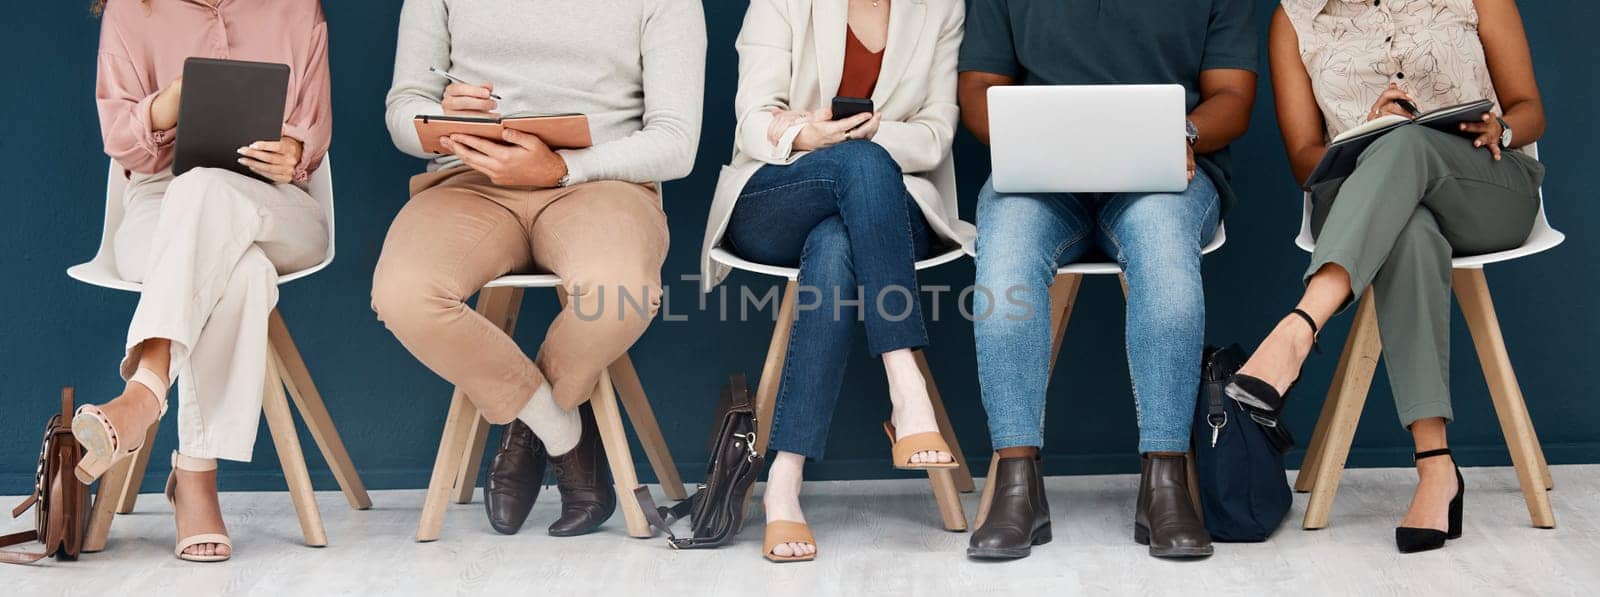 Technology, diversity with group of people and sitting together. Laptop, smartphone and tablet. Social networking or media, connectivity or streaming media and colleagues with tech sit on chair.